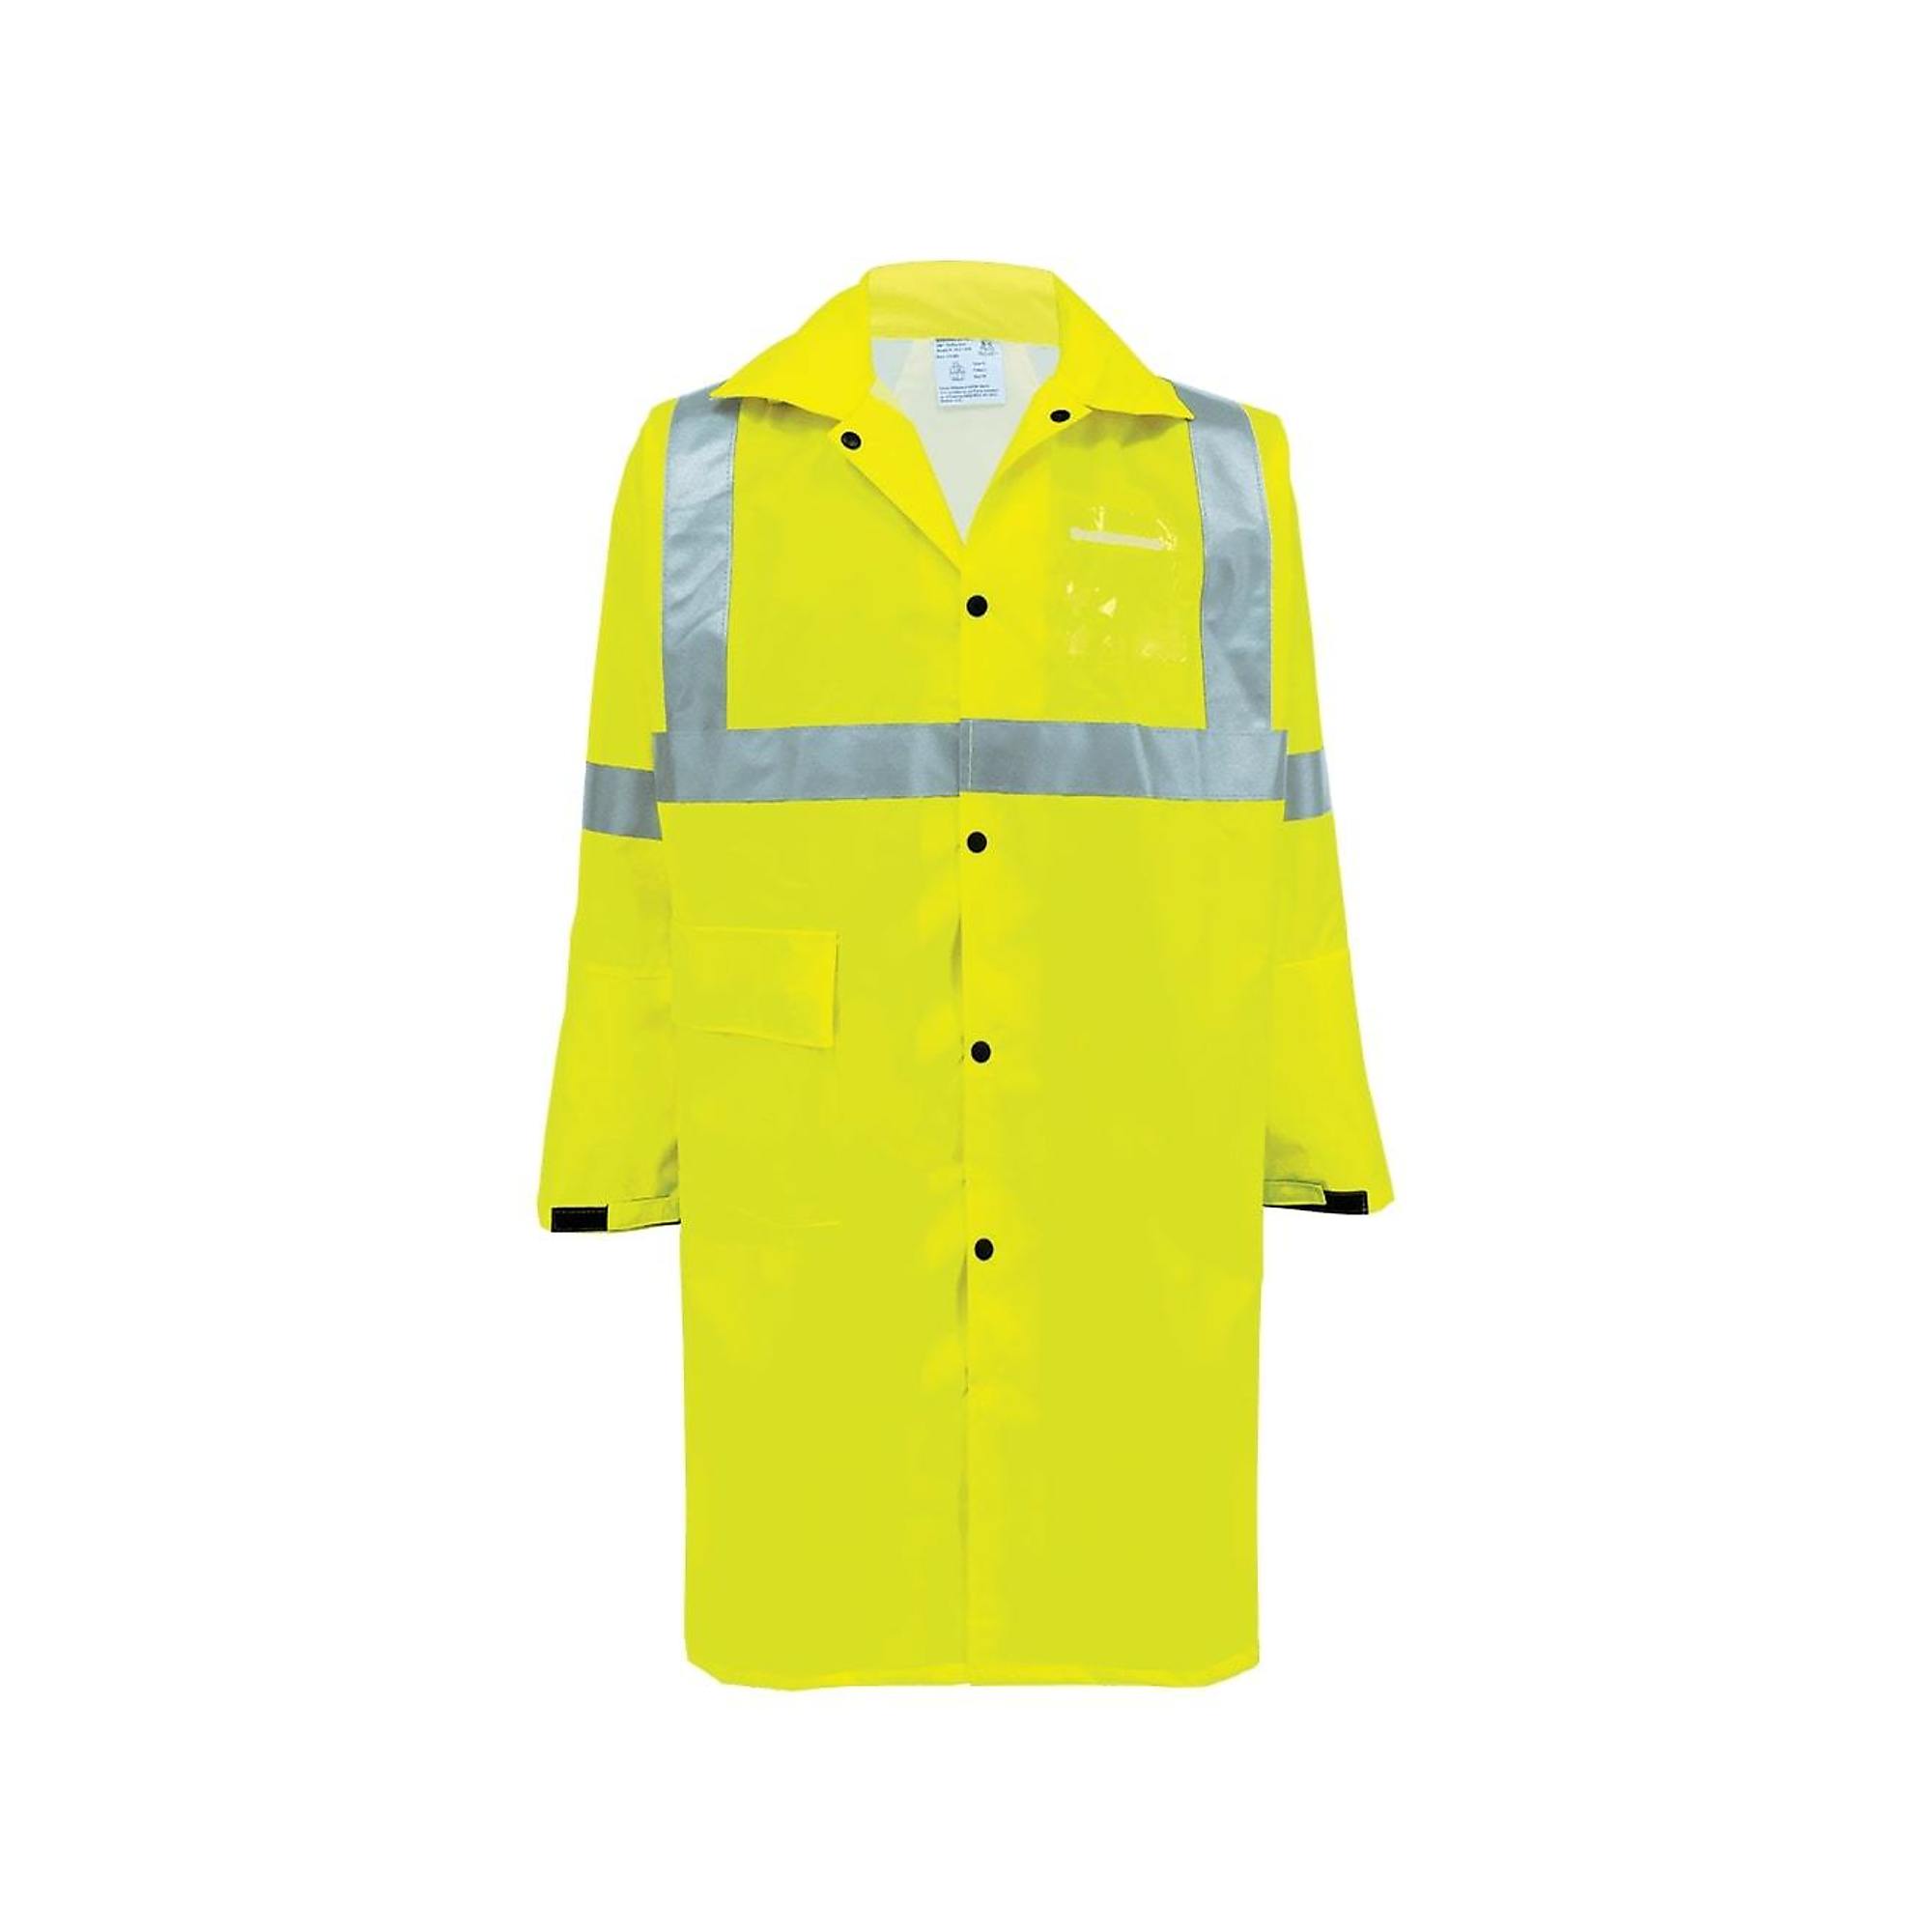 FrogWear, HV Yel/Grn, Class 3 Self-Extinguish, 1 Pocket Duster Jacket, Size L, Color High-Visibility Yellow/Green, Model GLO-1450-L